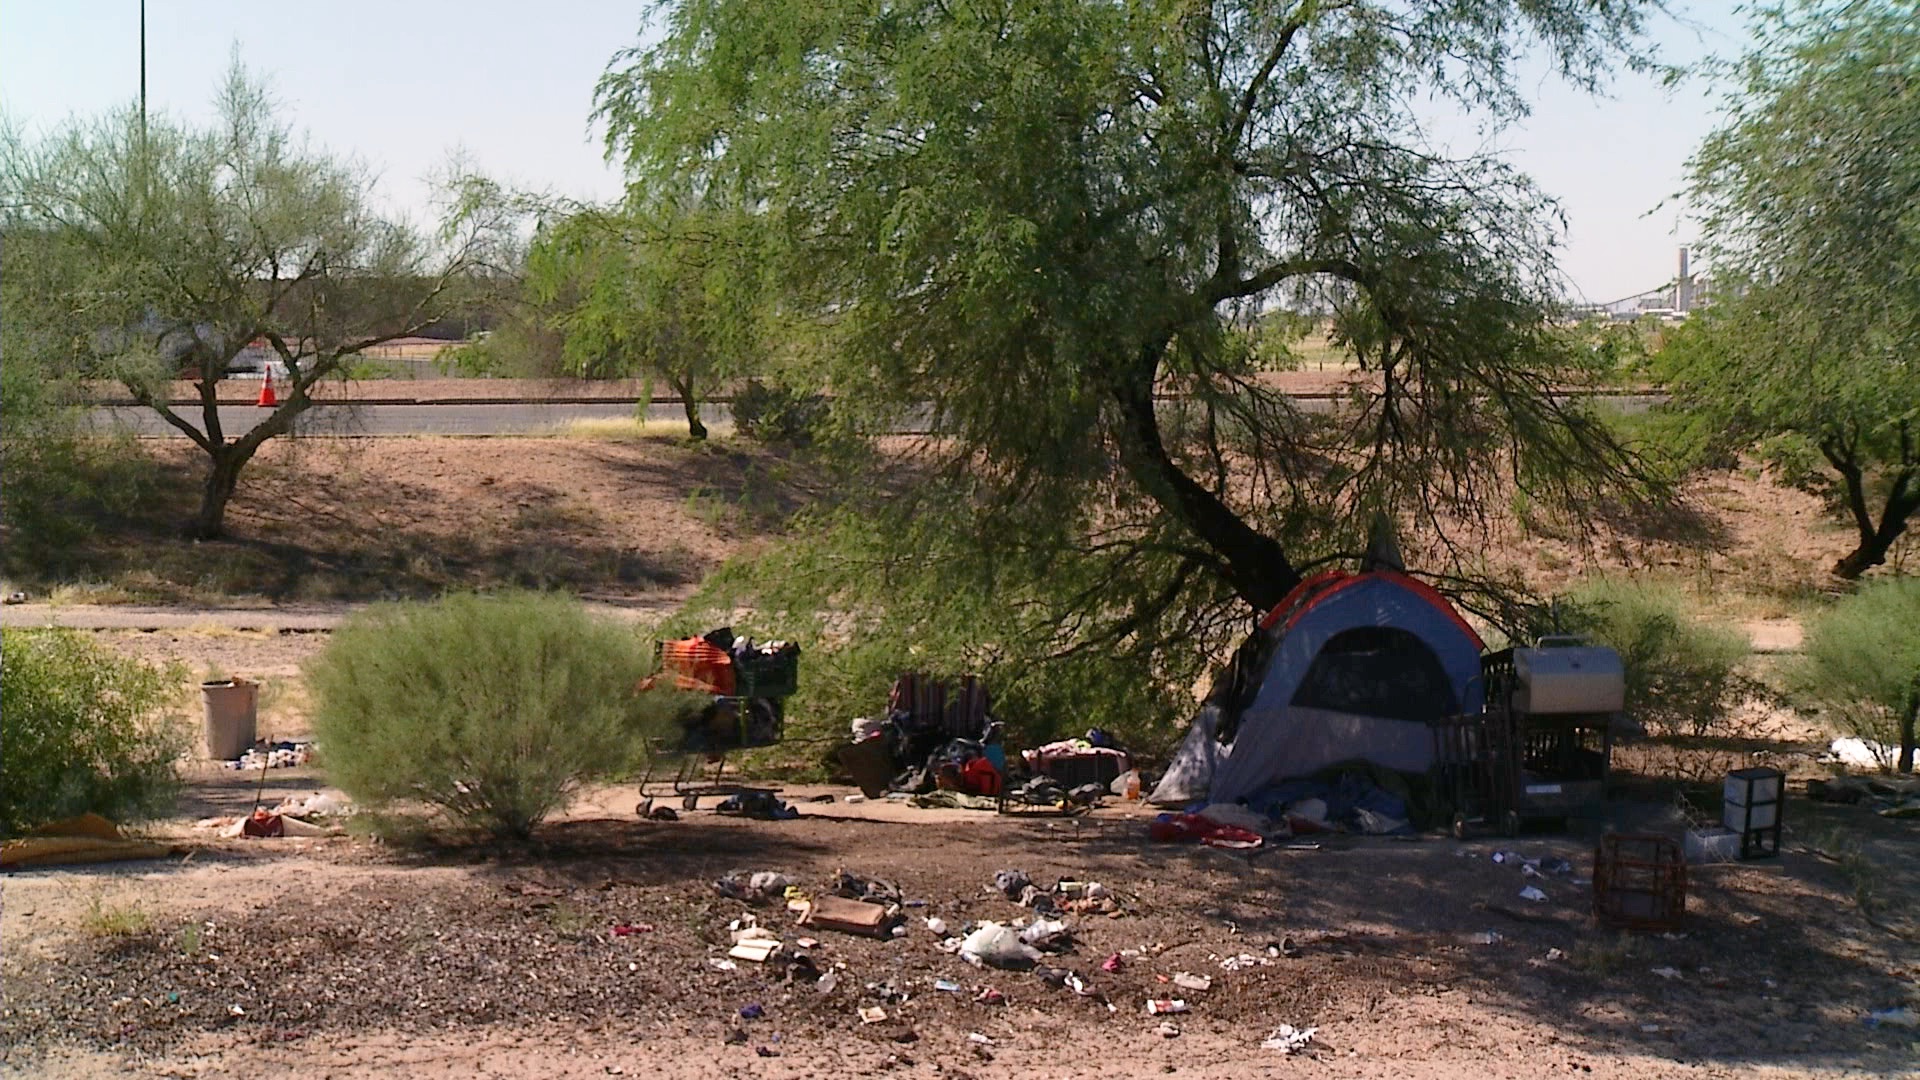 Items scattered about at a homeless encampment near Golf Links Road in Tucson.